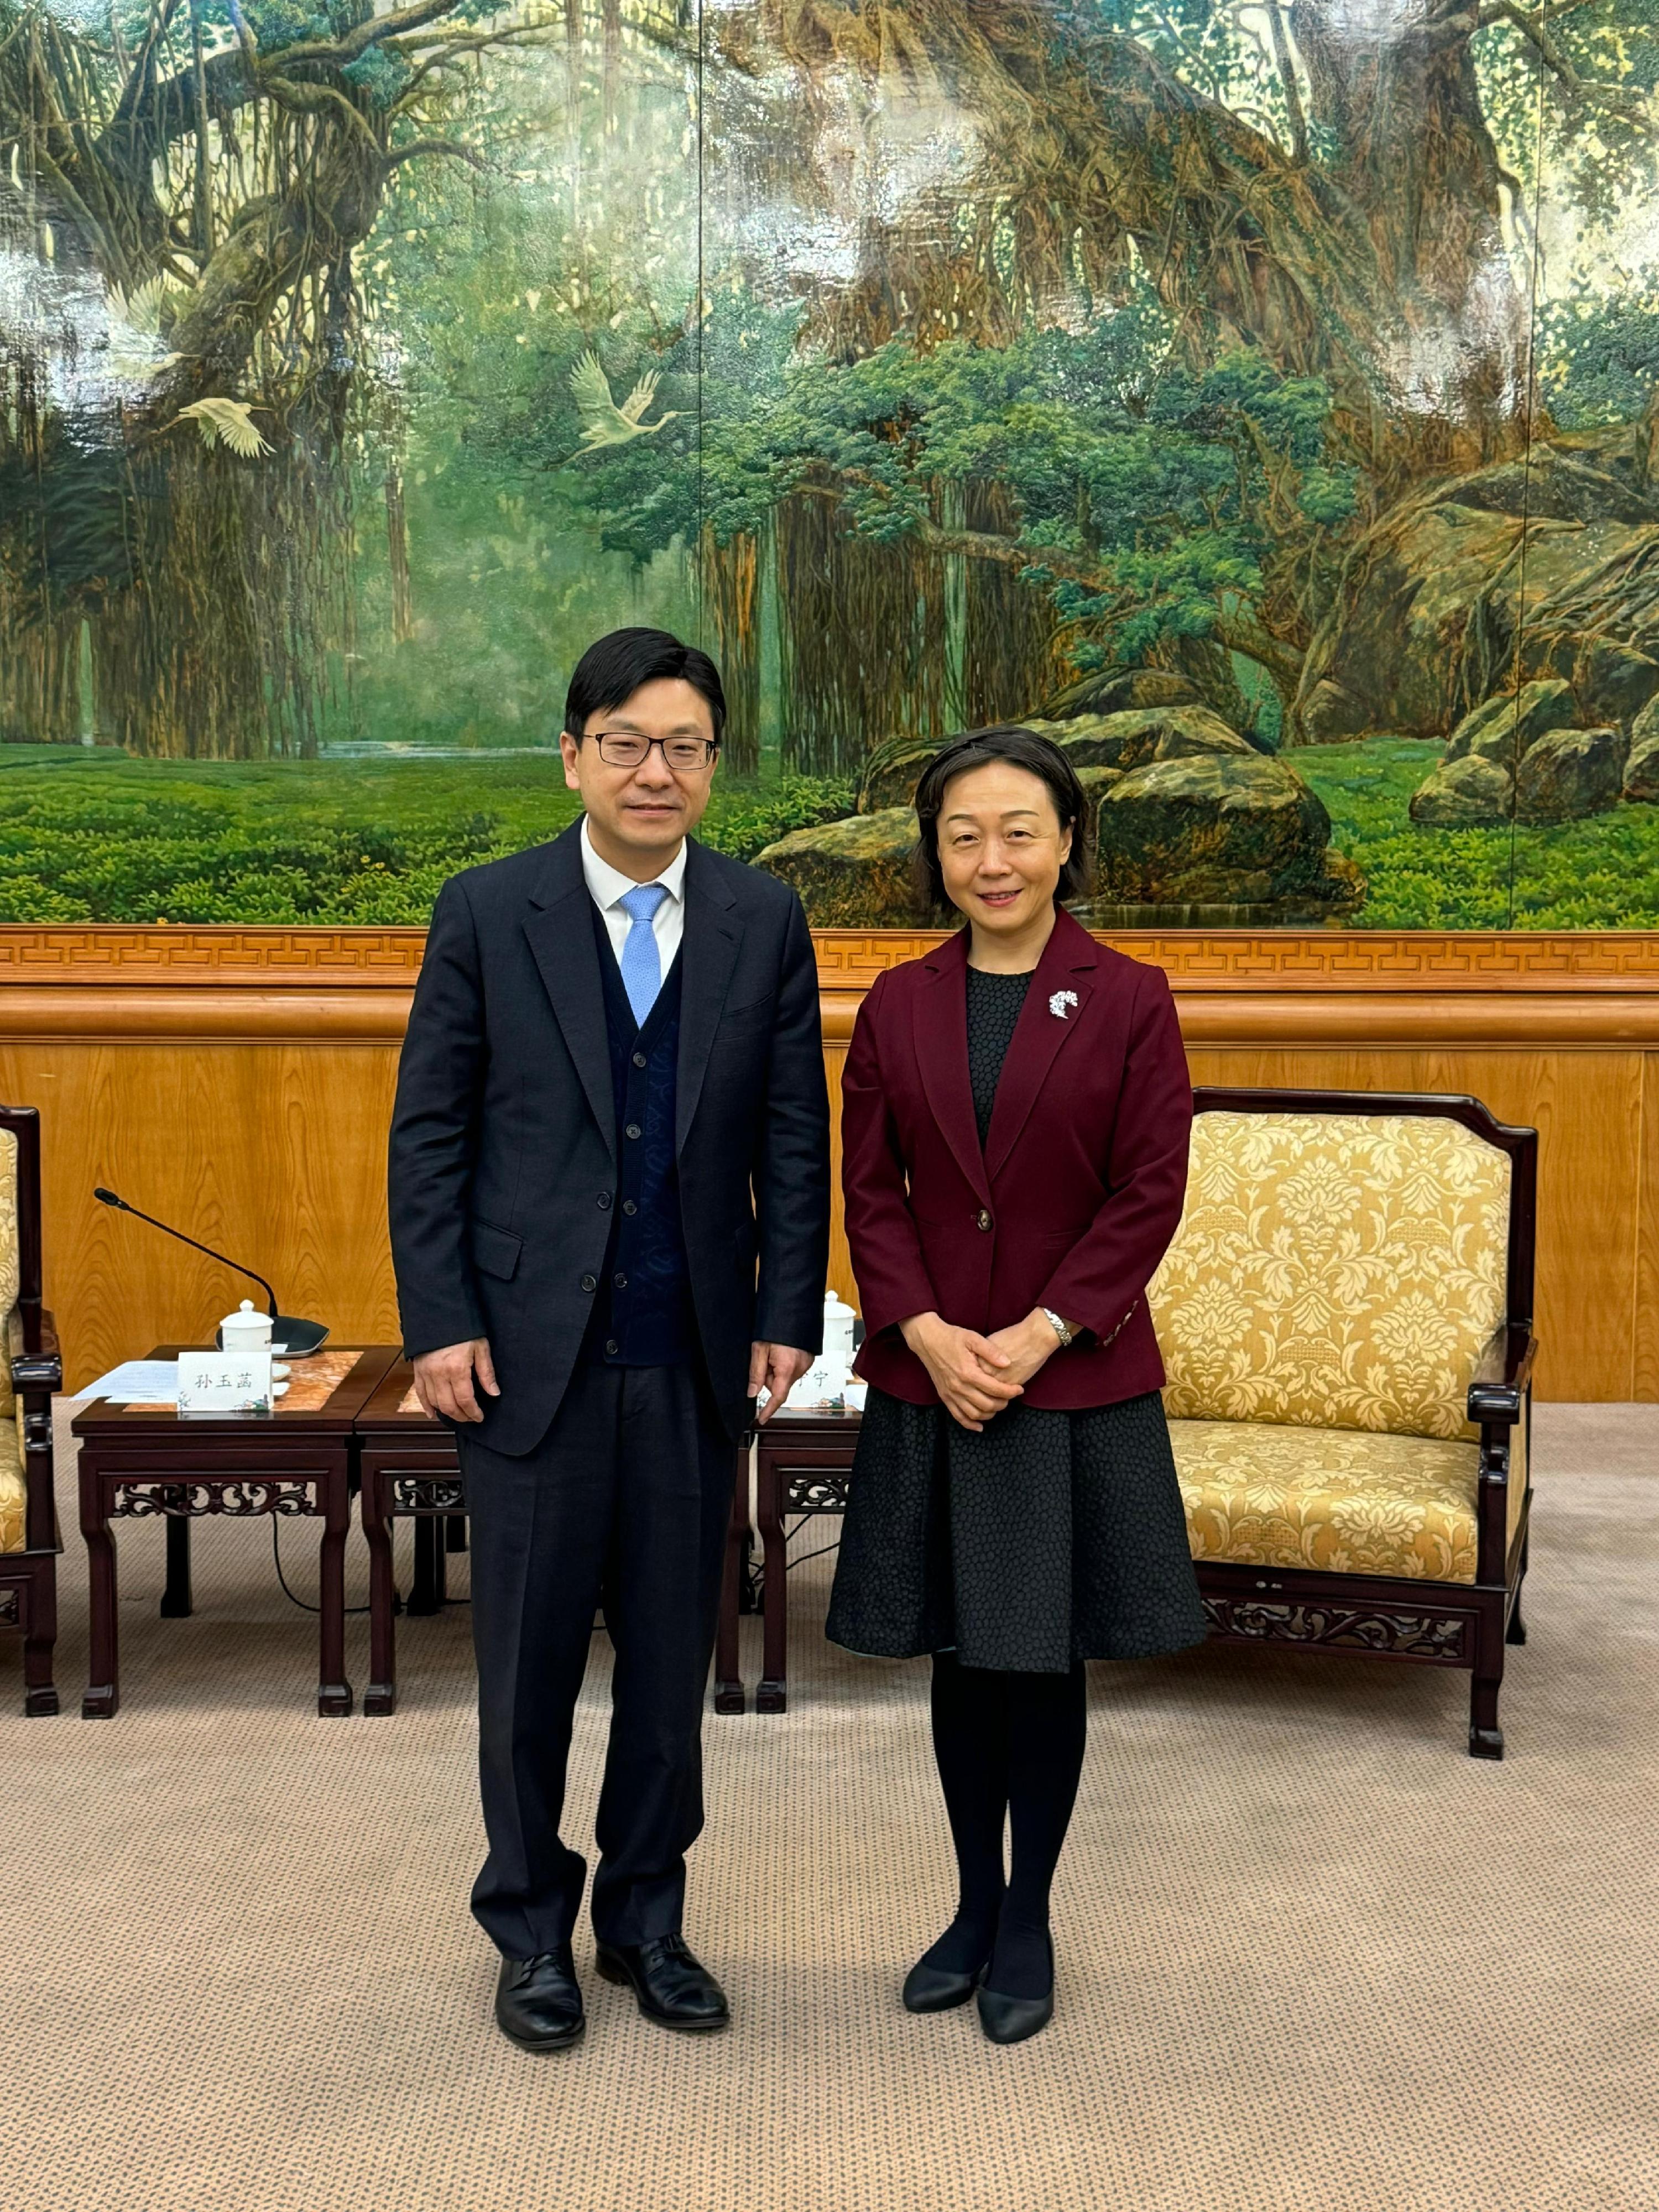 The Secretary for Labour and Welfare, Mr Chris Sun, today (March 4) started his visit to Fuzhou, Fujian. The Director of Hong Kong Talent Engage, Mr Anthony Lau, also joined the visit. Photo shows Mr Sun (left) at the courtesy call on the Executive Vice Governor of Fujian Province, Ms Guo Ningning (right) this morning. He updated her on Hong Kong's policy initiatives to recruit and support talent as well as the latest situation of the local labour market and economy.